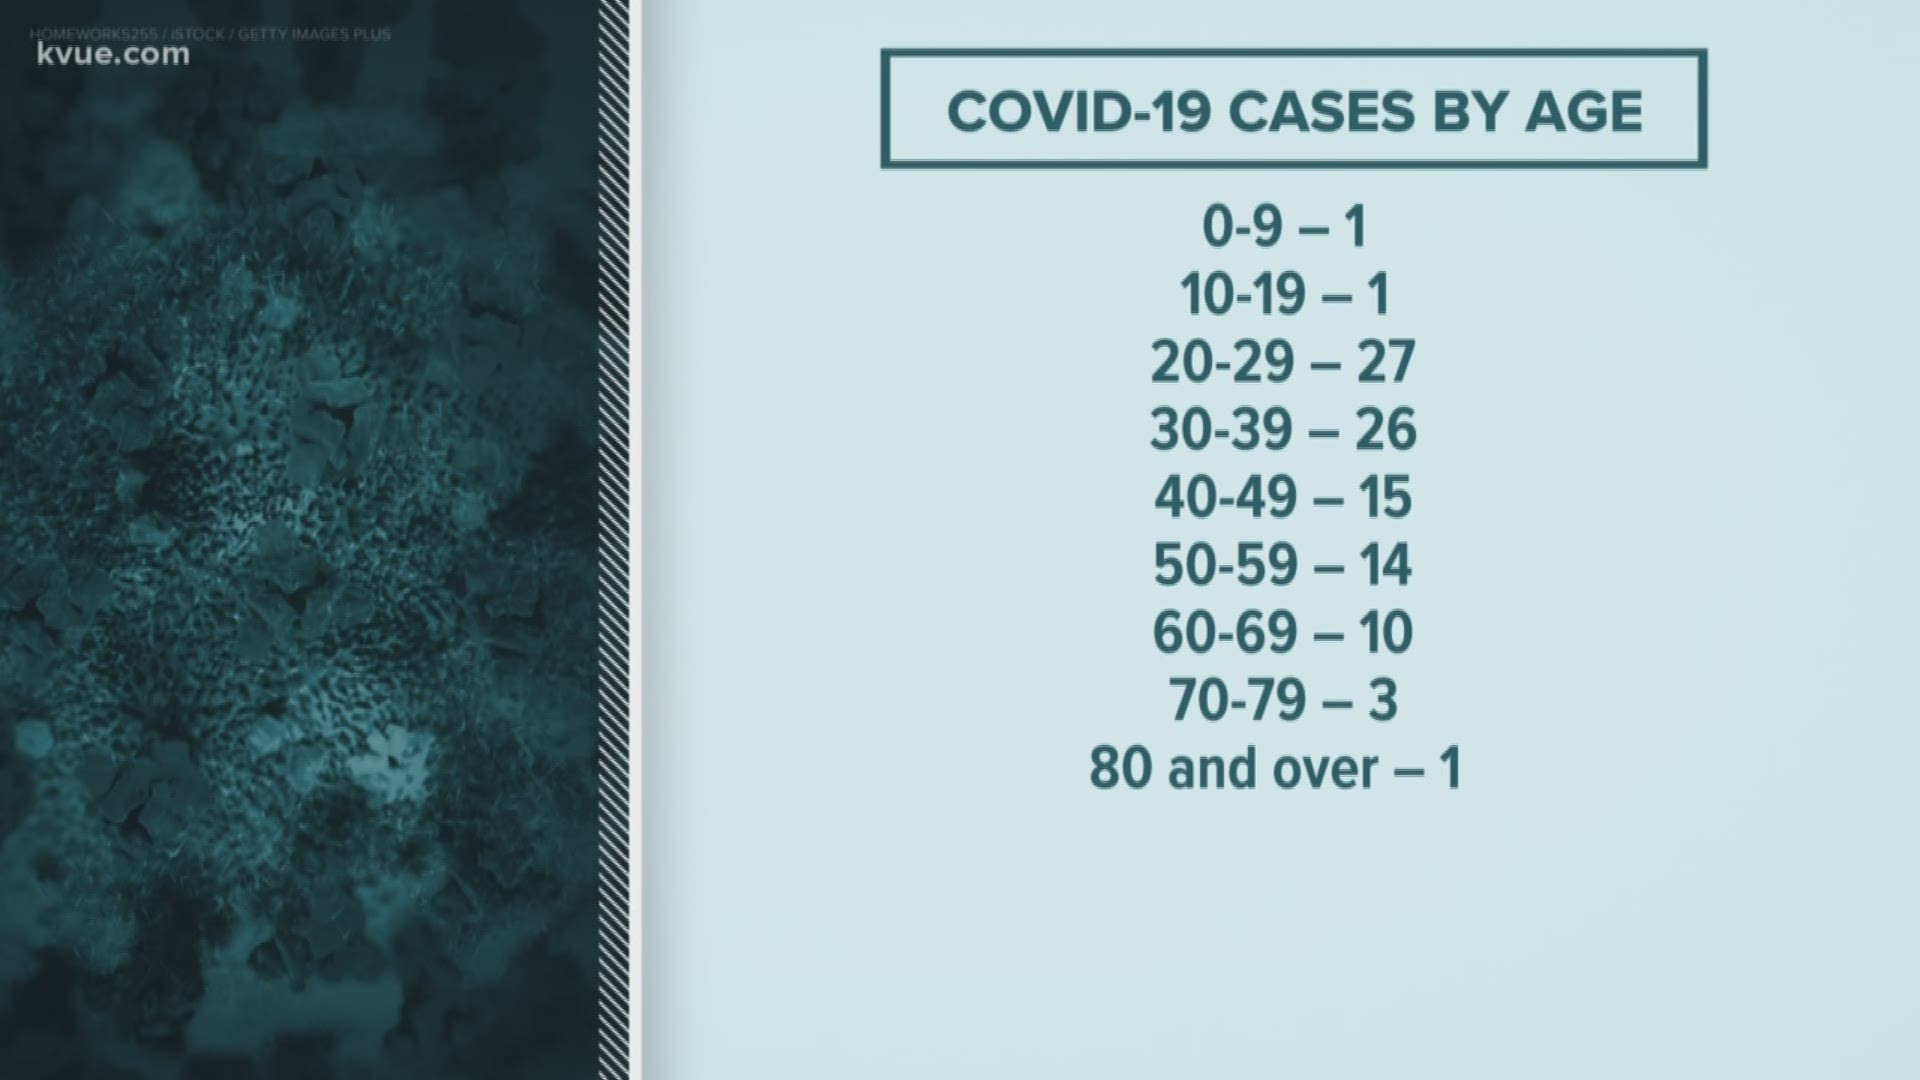 As of Wednesday evening, the majority of confirmed coronavirus cases in Austin are among those in their 20s and 30s.